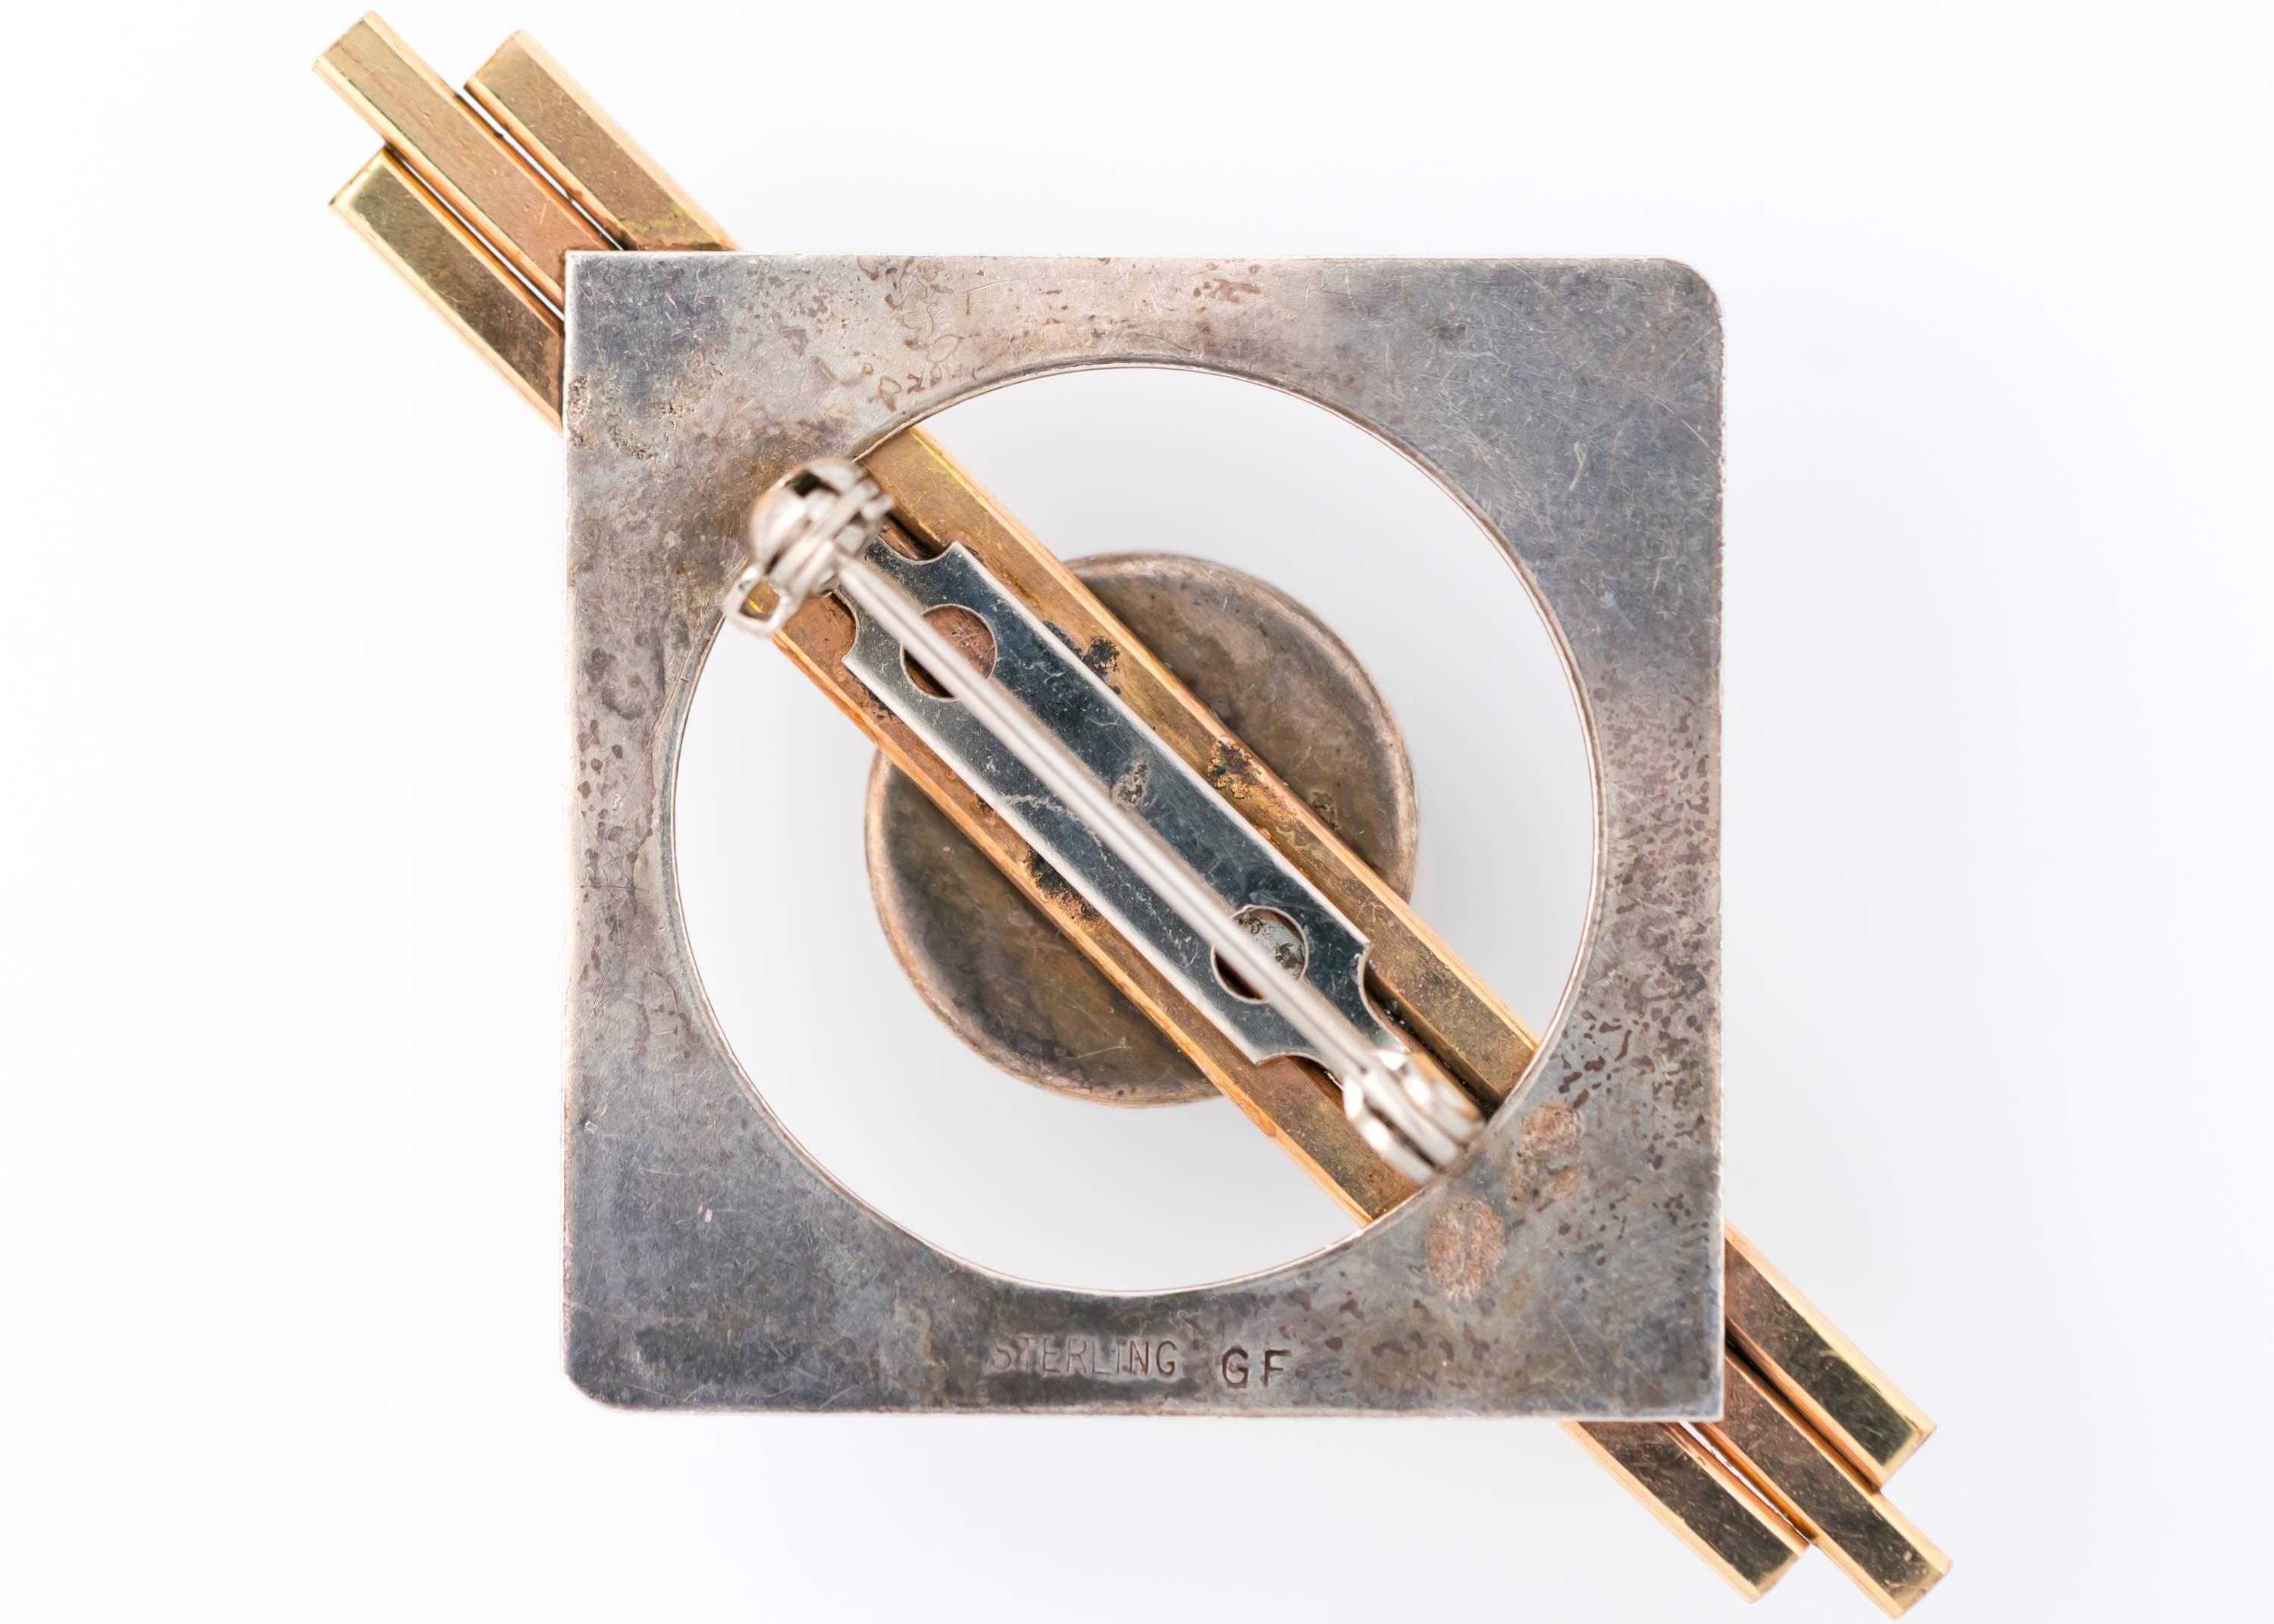 1950s Retro, Art Deco-Inspired Geometric Brooch. Features a Malachite Cabachon, 18K Yellow Gold Fill and Sterling Silver. The 14.5 millimeter Round Malachite cabochon is centered atop 3 parallel, horizontal gold bars. A Sterling Silver Square with a